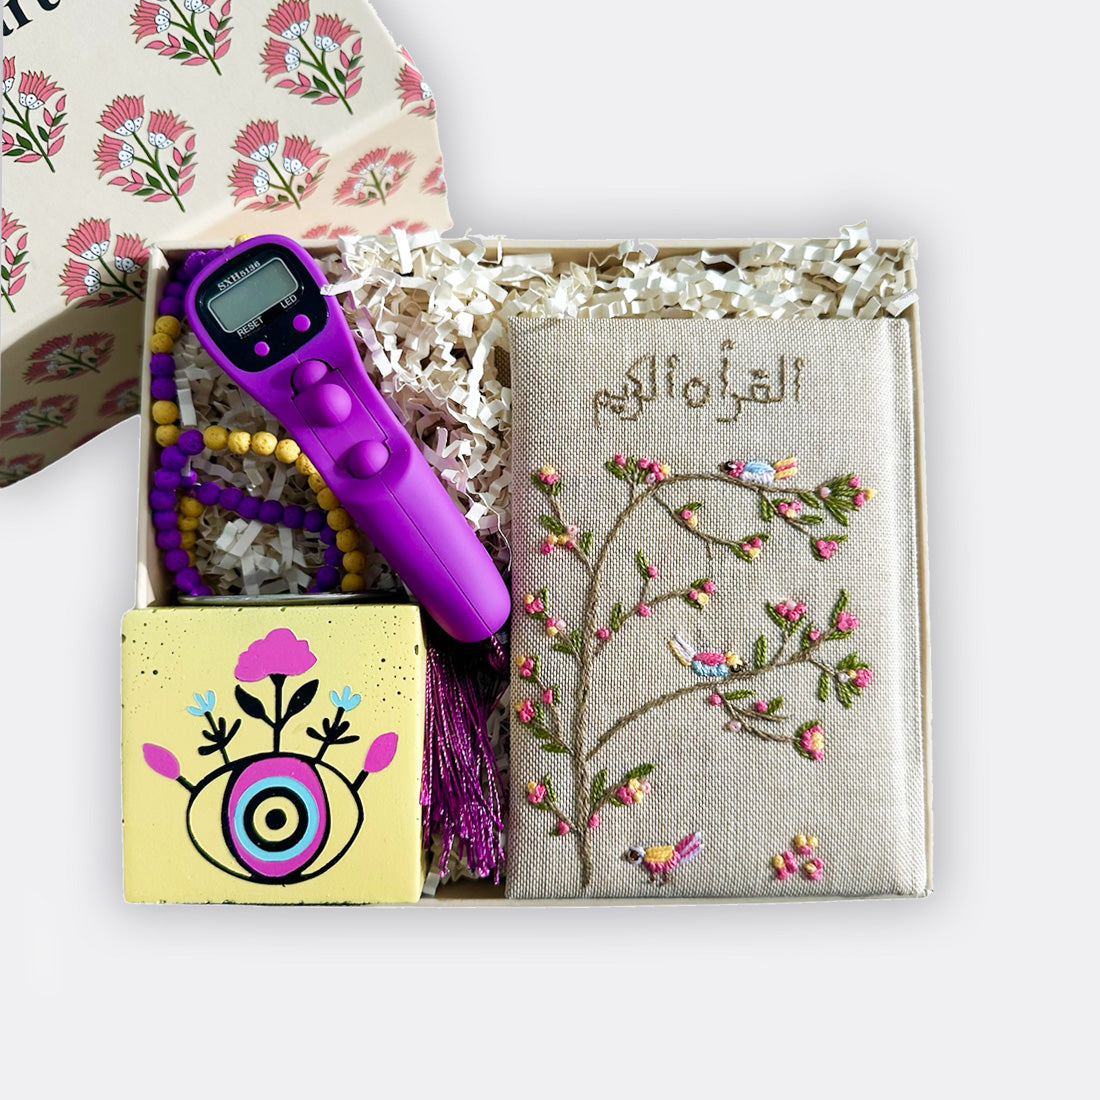 Hand Embroidered Quran, Hand Painted Bird Mabkhara, Digital Counter Adorn With Natural Lava Stones, shop the best ramadan gift gifts for her for him from Inna carton online store dubai, UAE!